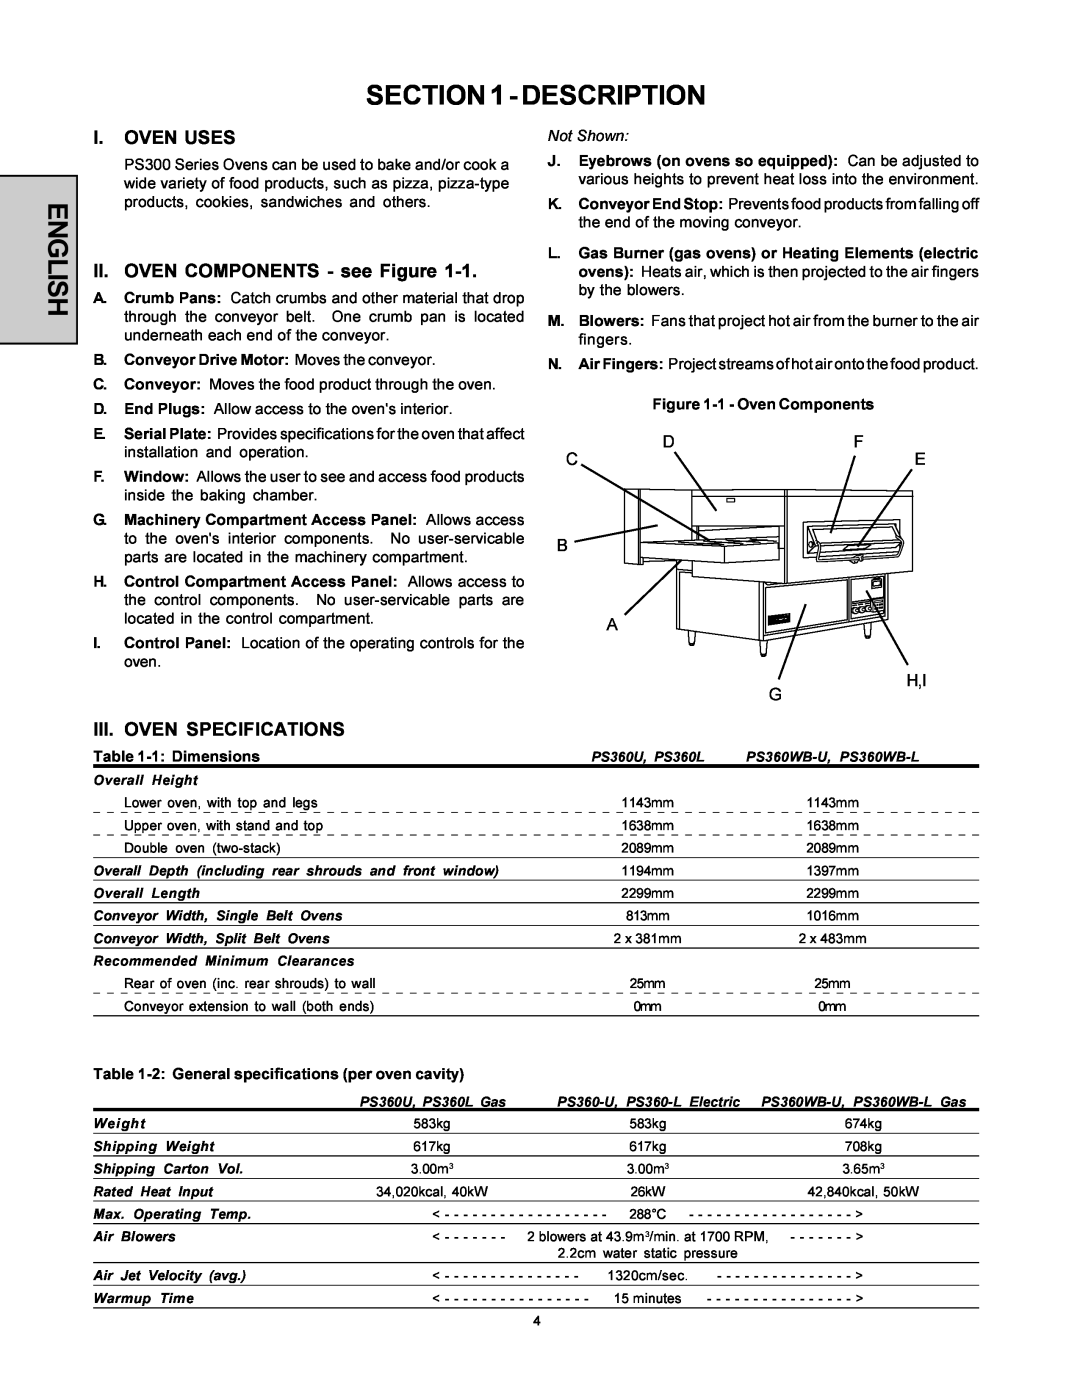 Middleby Marshall PS360WB-U Description, I. Oven Uses, II. OVEN COMPONENTS - see Figure, Iii. Oven Specifications, English 